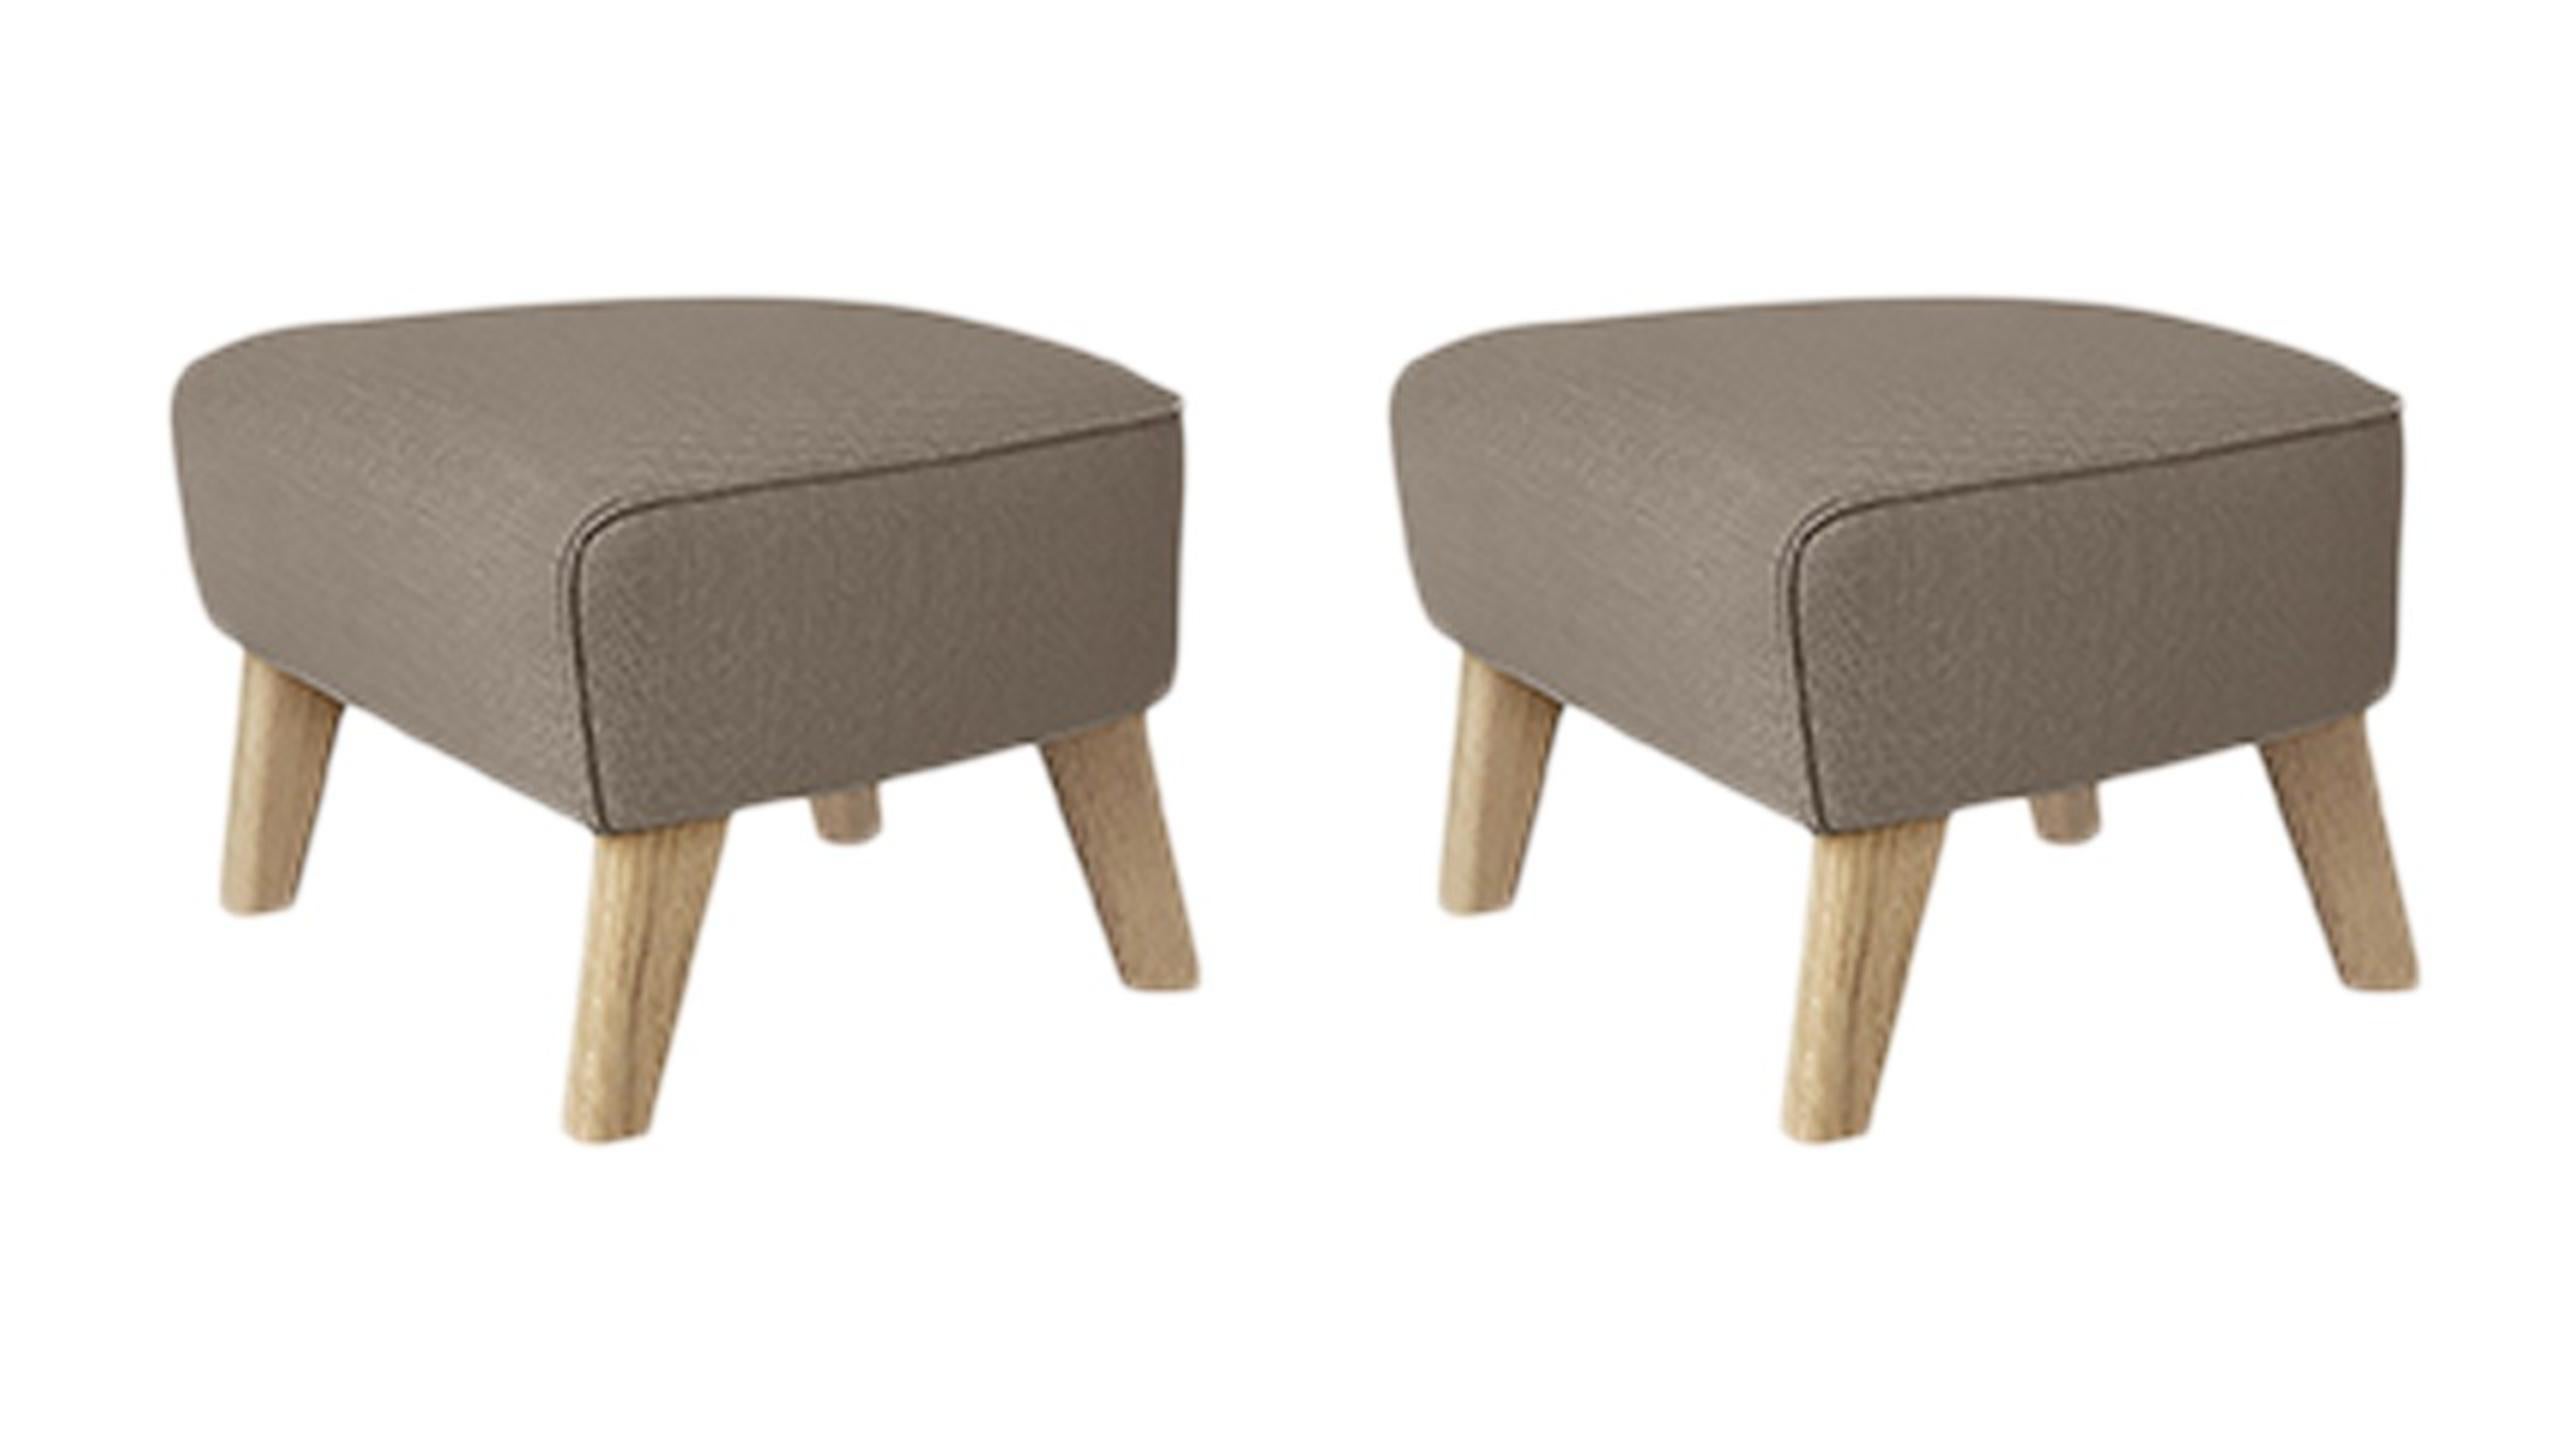 Set of 2 dark beige, natural oak Raf Simons Vidar3 My Own Chair Footstool by Lassen
Dimensions: W 56 x D 58 x H 40 cm 
Materials: Textile
Also available: other colors available.

The My Own Chair Footstool has been designed in the same spirit